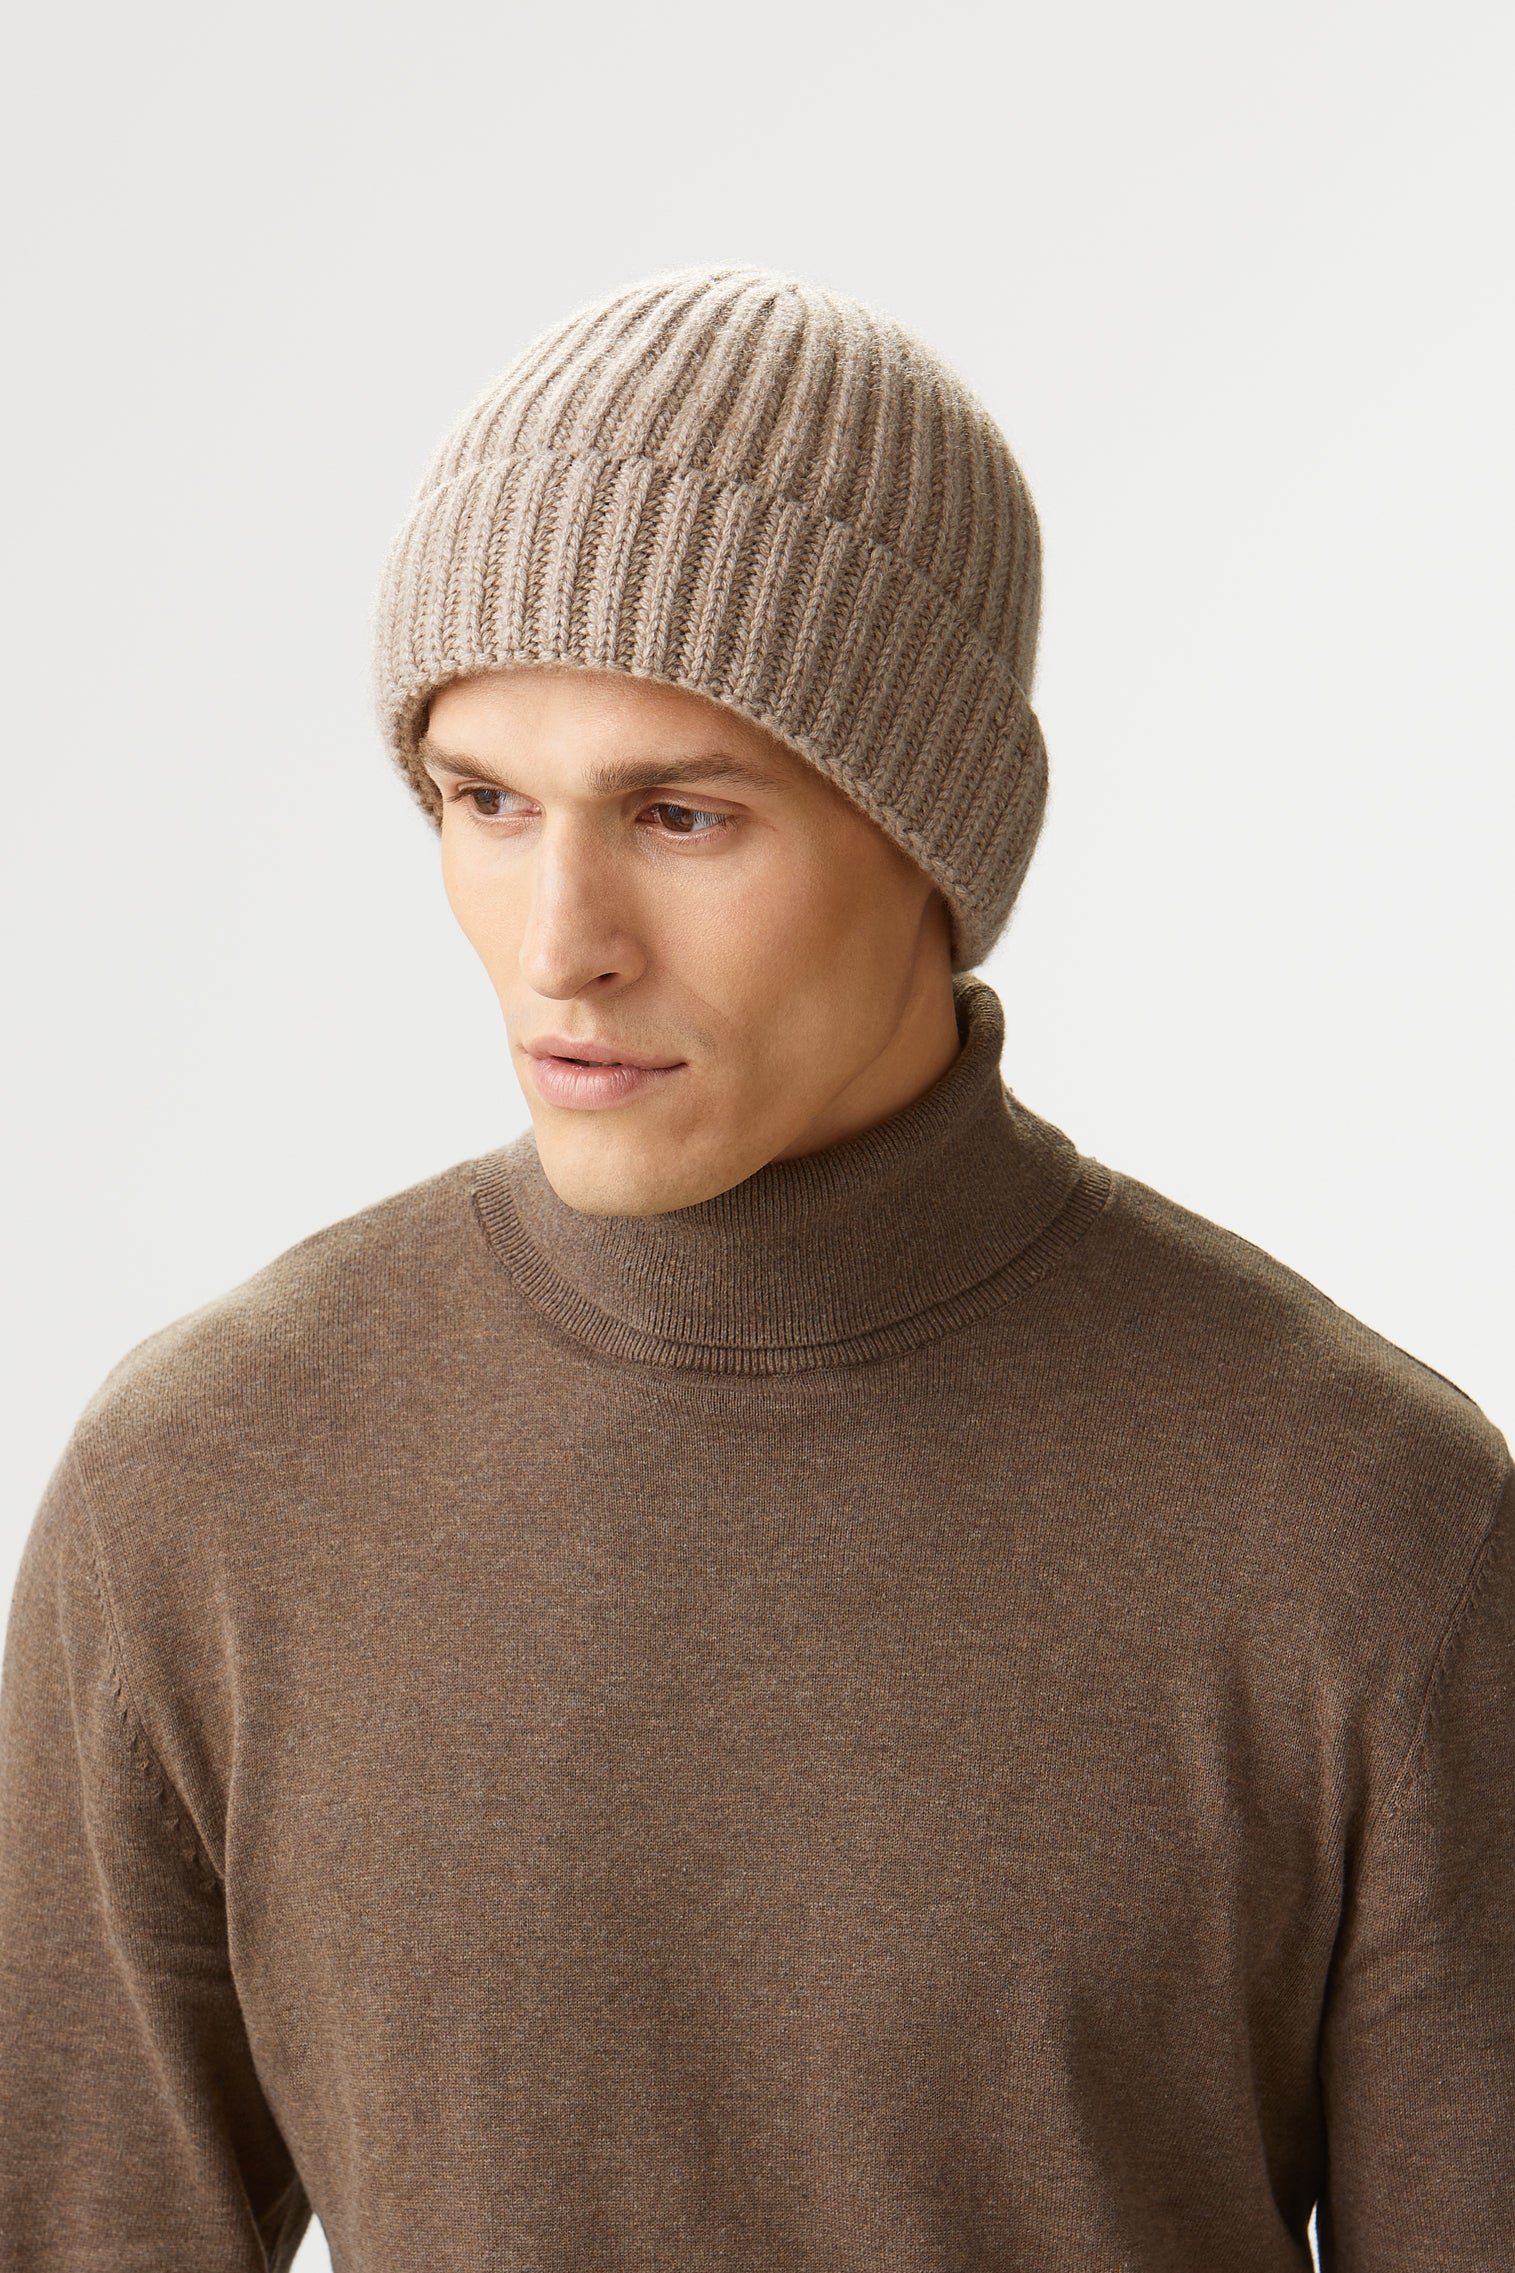 Rannoch Cashmere Beanie - Hats for Round Face Shapes - Lock & Co. Hatters London UK